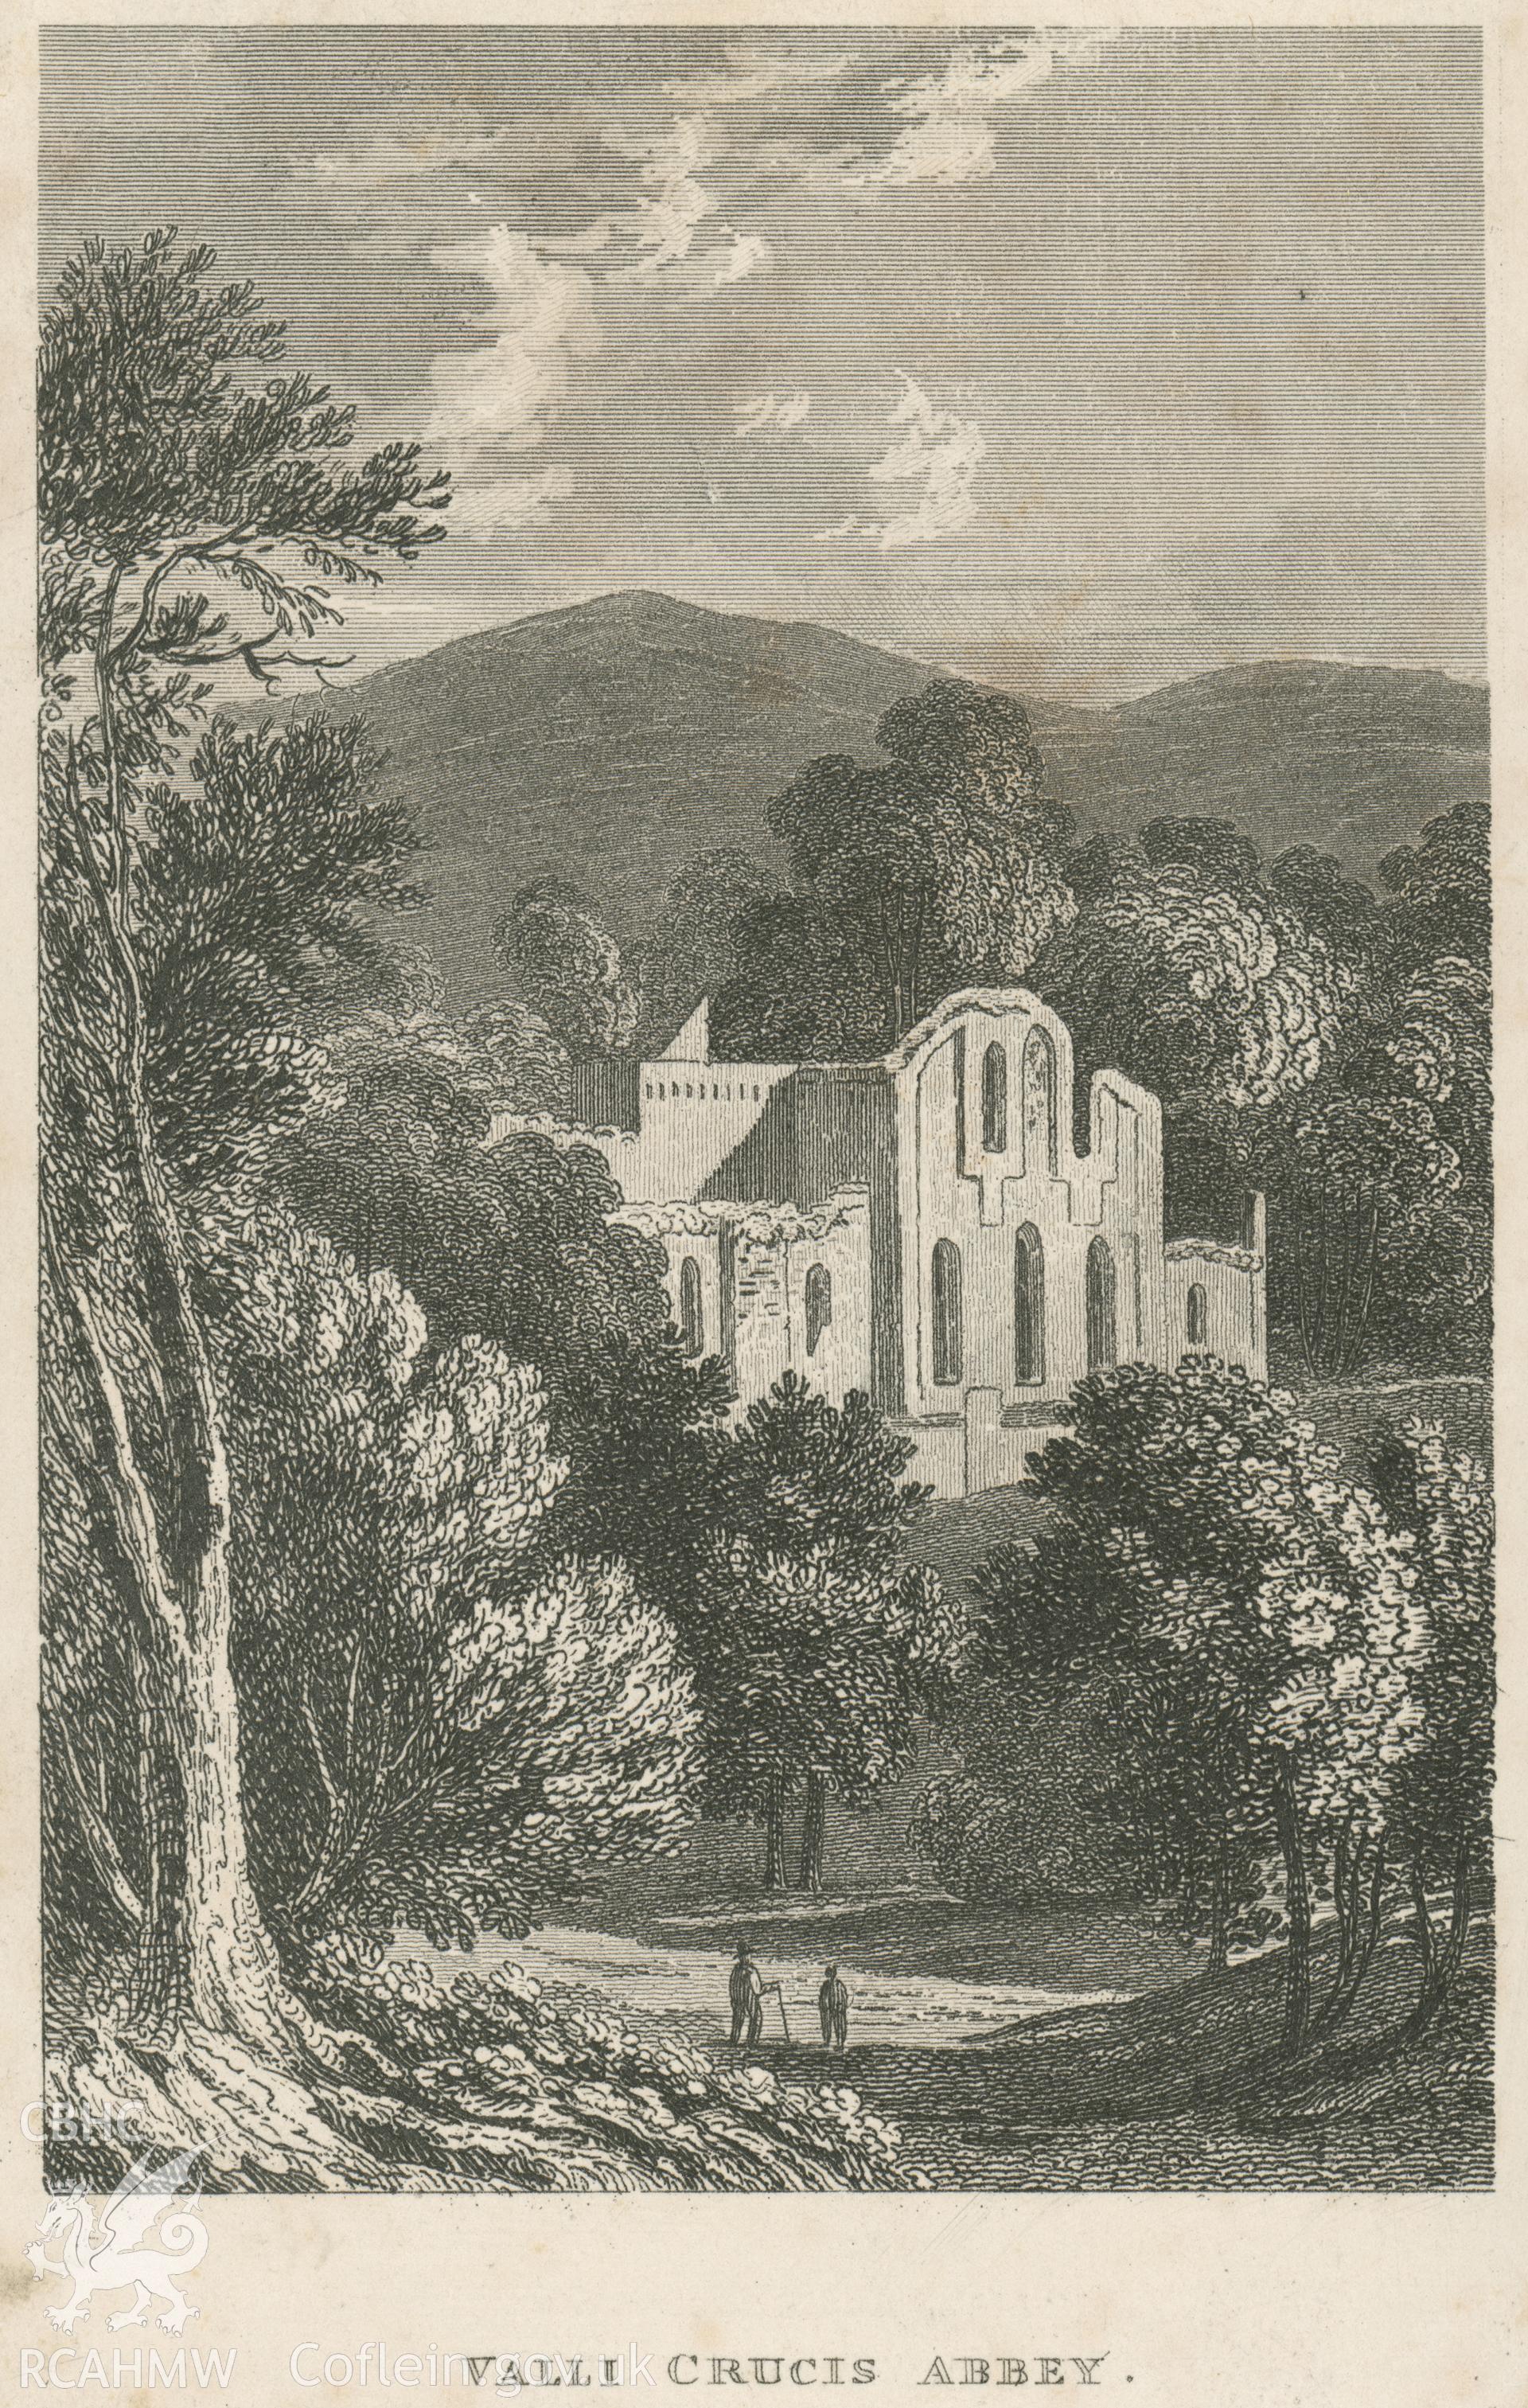 Engraving by showing Valle Crucis Abbey.